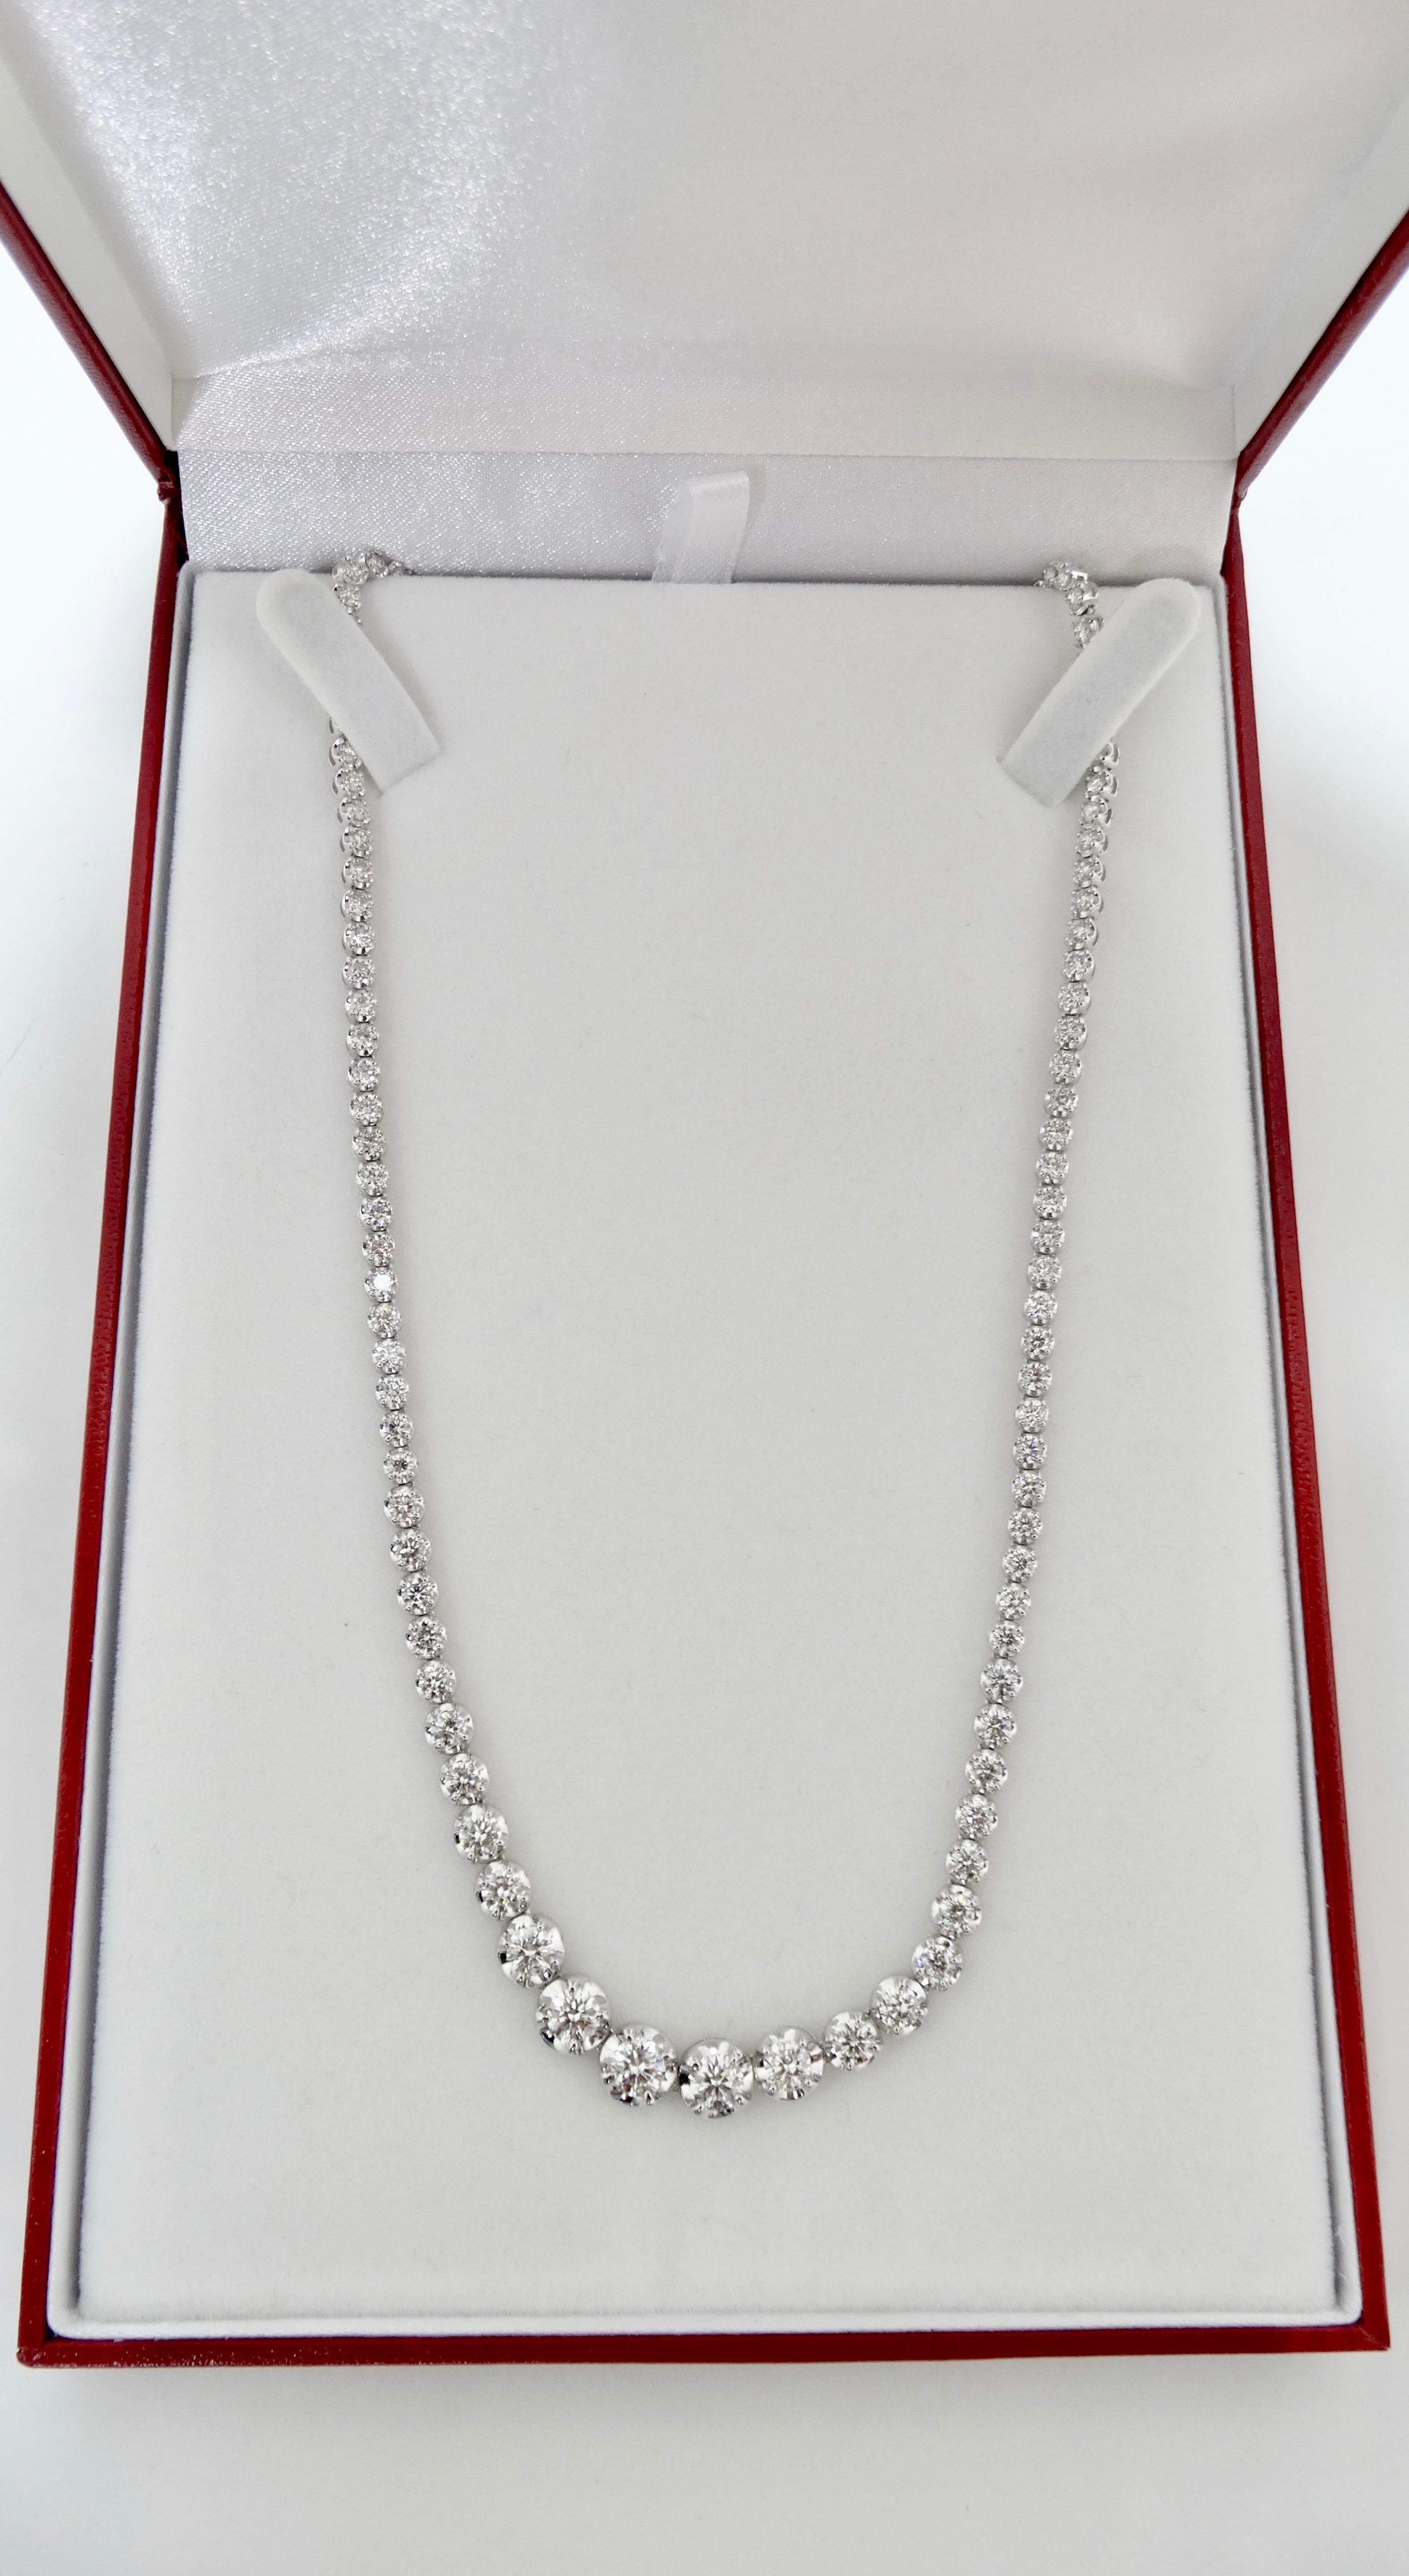 Gorgeous and timeless, this necklace is USA made and is crafted from 18k white gold and features 10.00ct round cut diamonds in a prong setting. Increasing in size, the diamonds color grade is G-H and are SI1 - SI2 clarity. Necklace size is 16